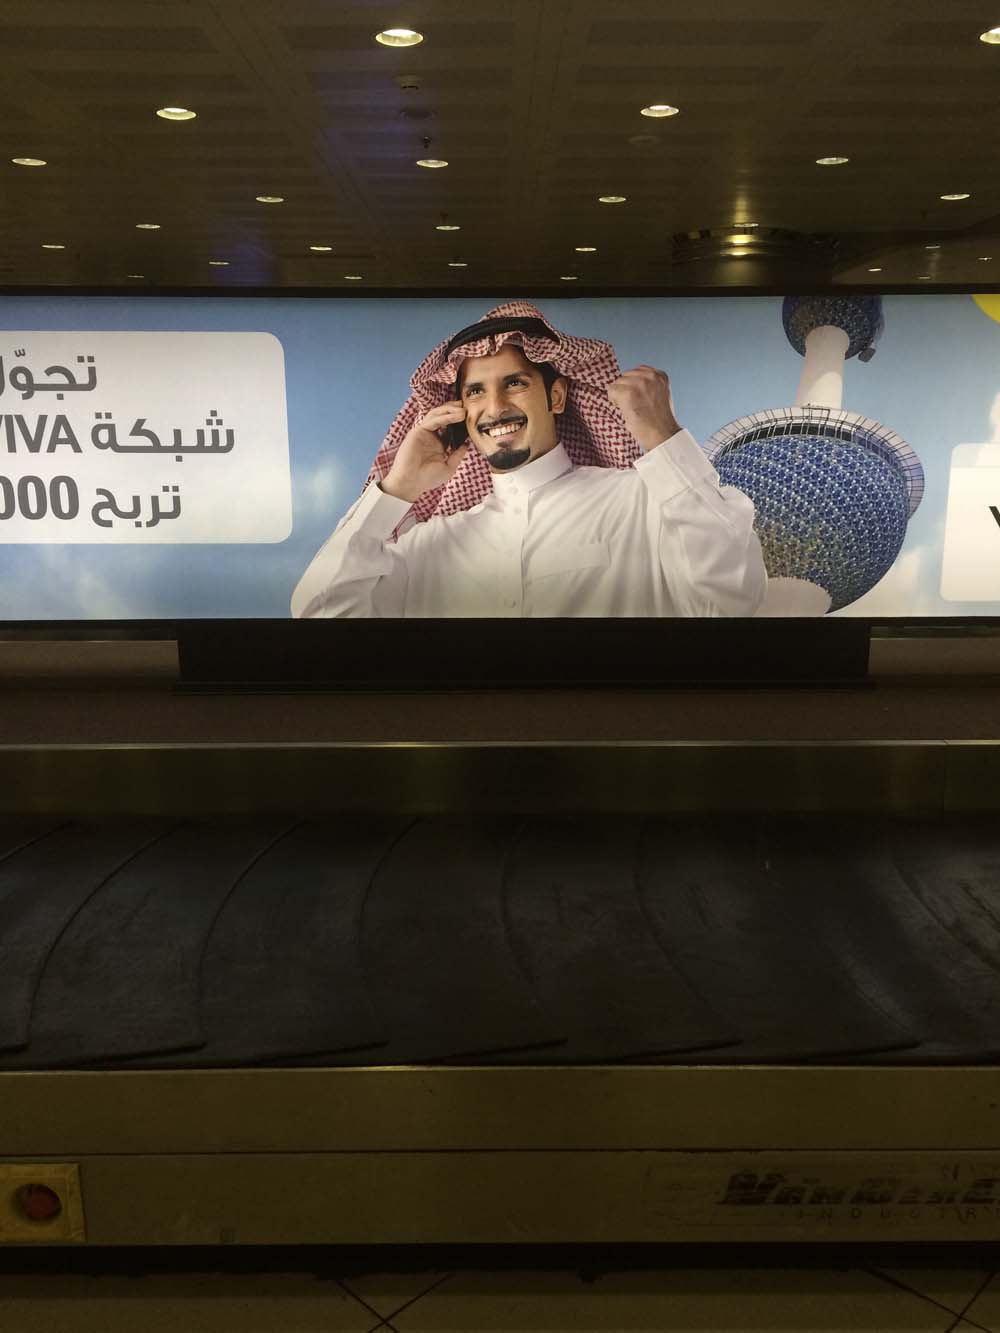 you may be wondering why this photo is relevant. well, a. it's a conveyor belt at the airport here in kuwait, and b. the guy in the ad looks uncannily like my brother